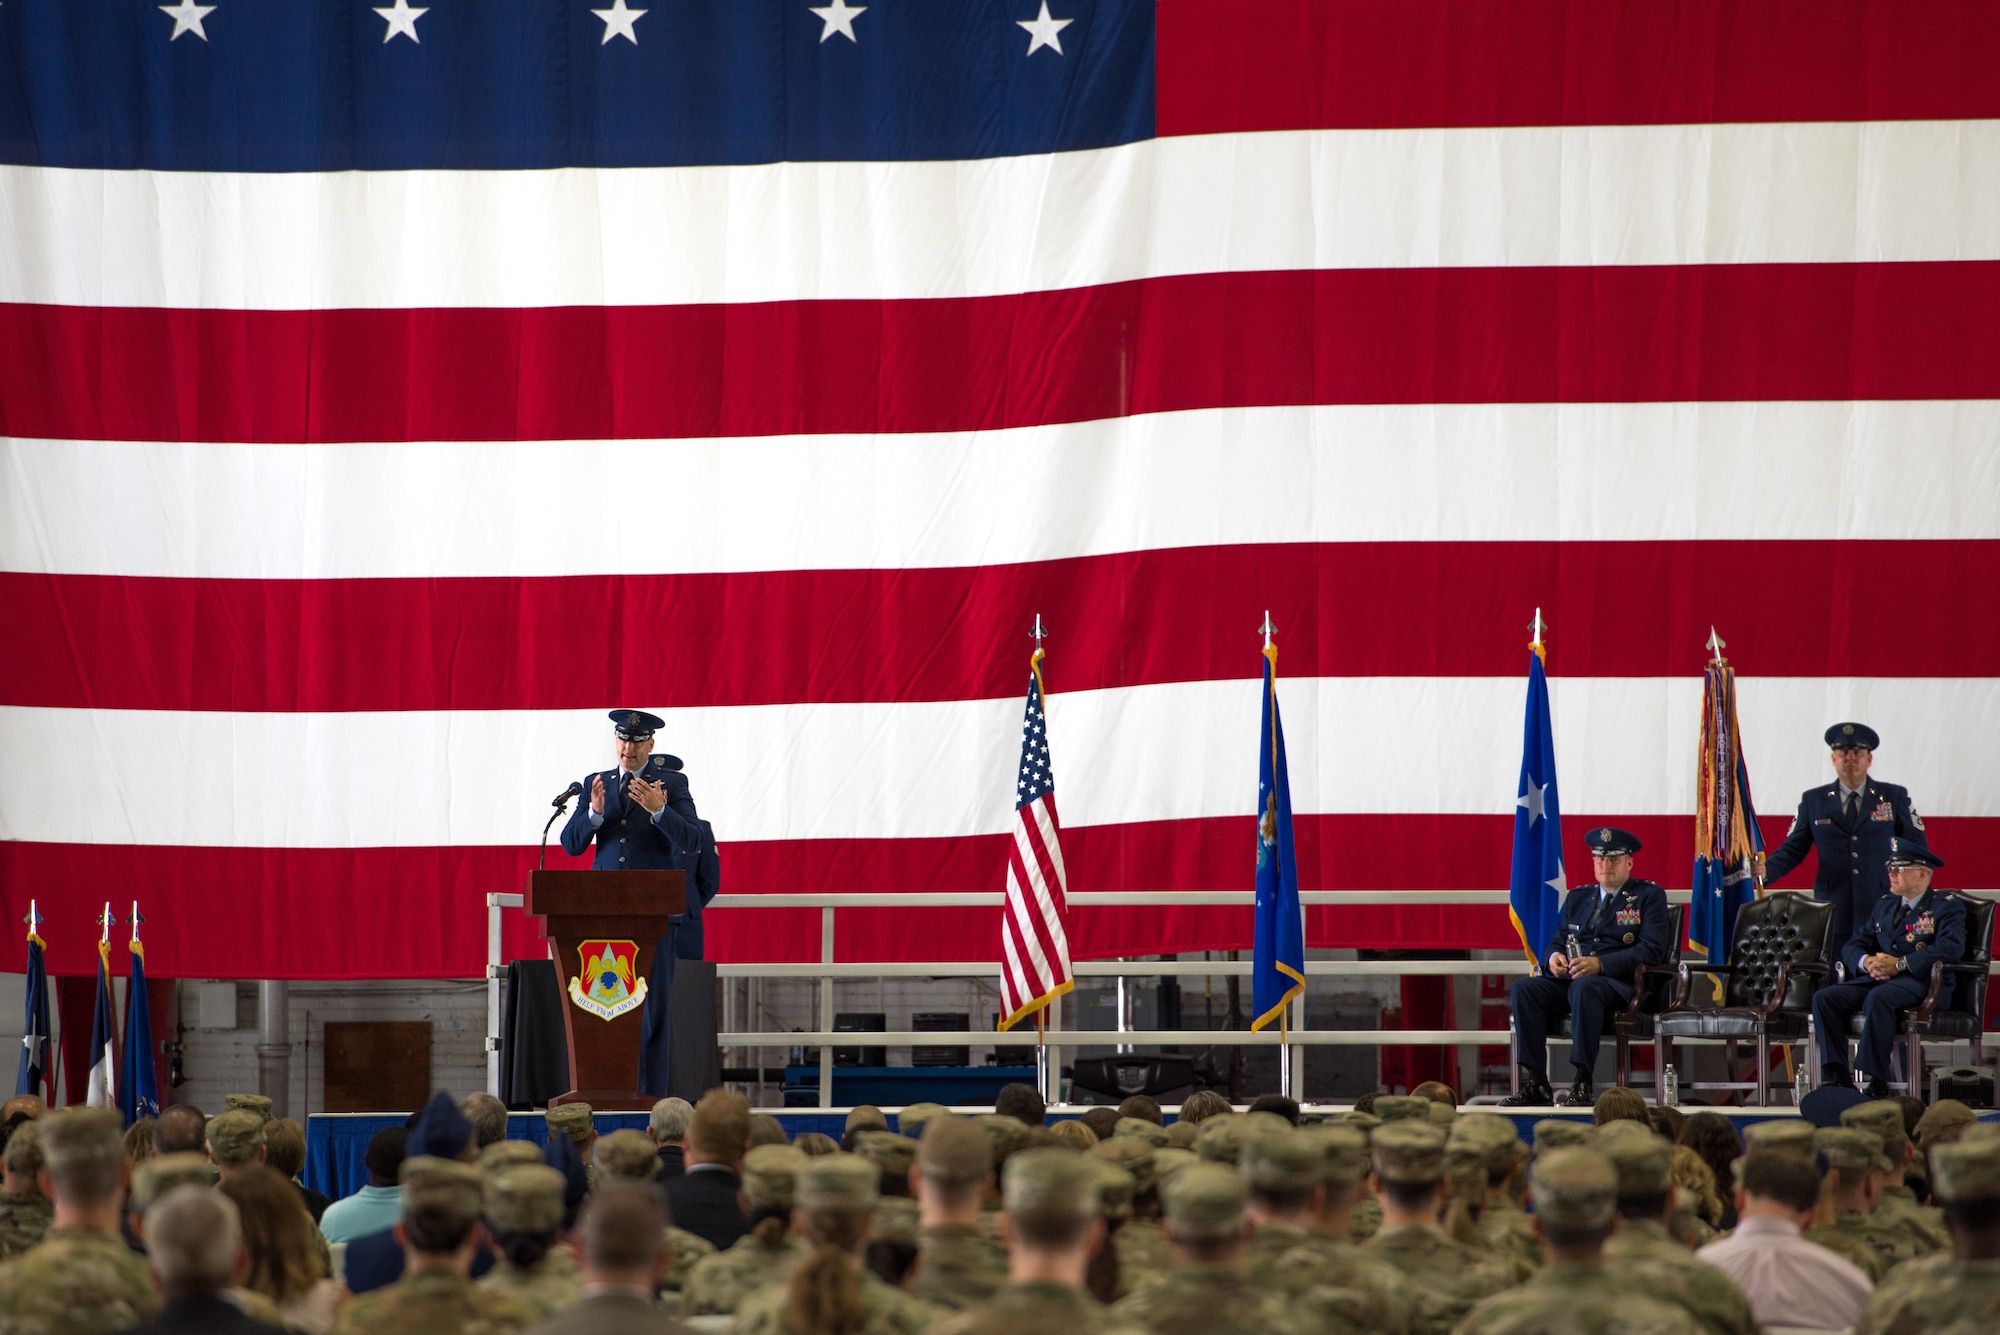 U.S. Air Force Col. Chris Robinson, 375th Air Mobility Wing commander, gives a speech on Scott Air Force Base, Illinois, July 1, 2021. The change of command ceremony represents a time-honored military tradition providing an opportunity for Airmen to witness the transfer of power to their newly appointed commanding officer. (U.S. Air Force photo by Airman 1st Class Mark Sulaica)